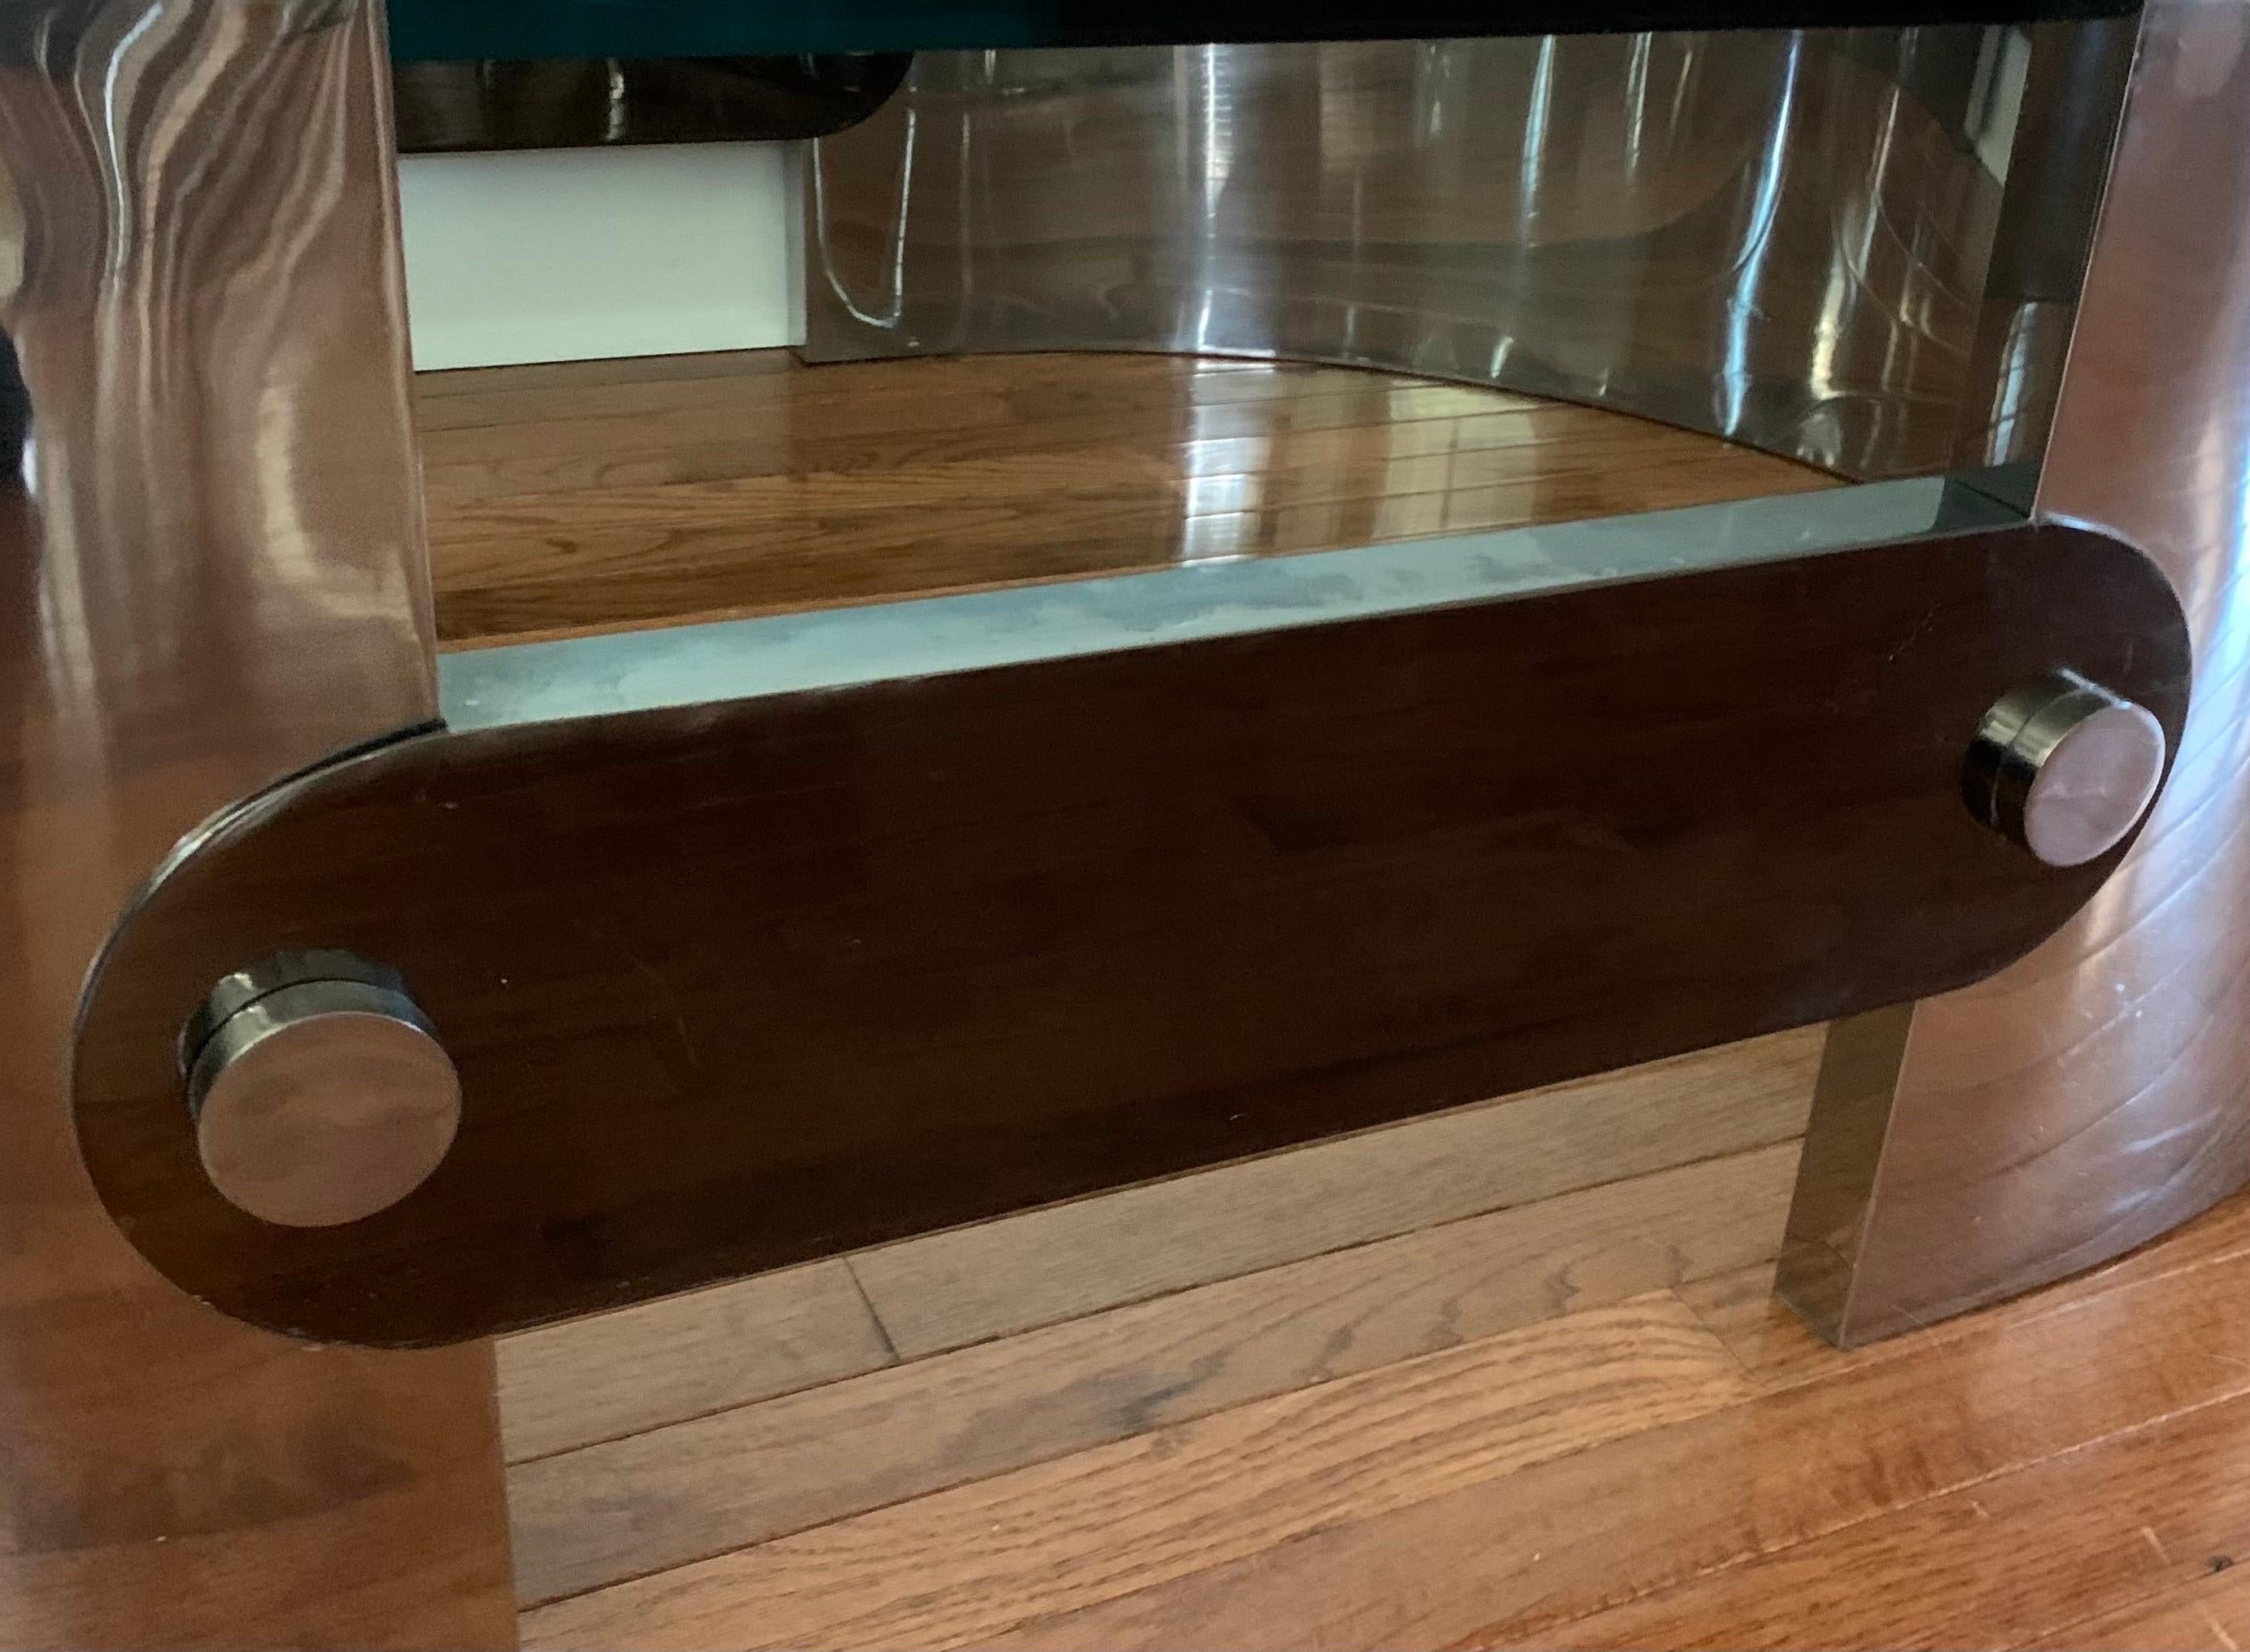 Hand-Crafted 1970s Modern Polished Steel & Glass Coffee Table by Ron Seff for Karl Springer